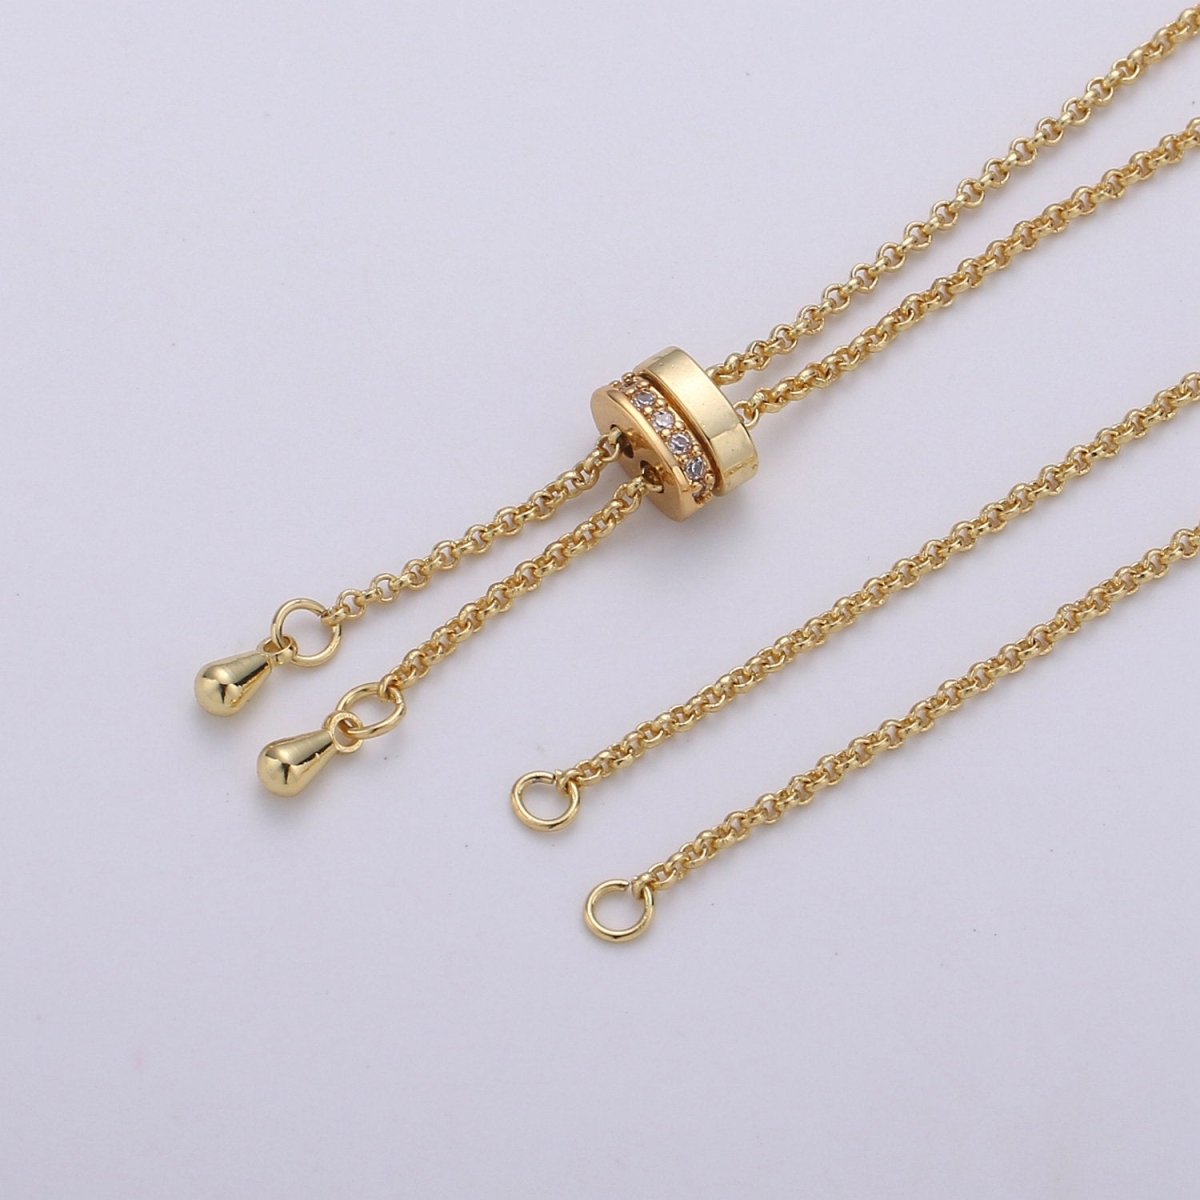 14k Gold Filled Adjustable Necklace Half finished Chain Necklace with ...